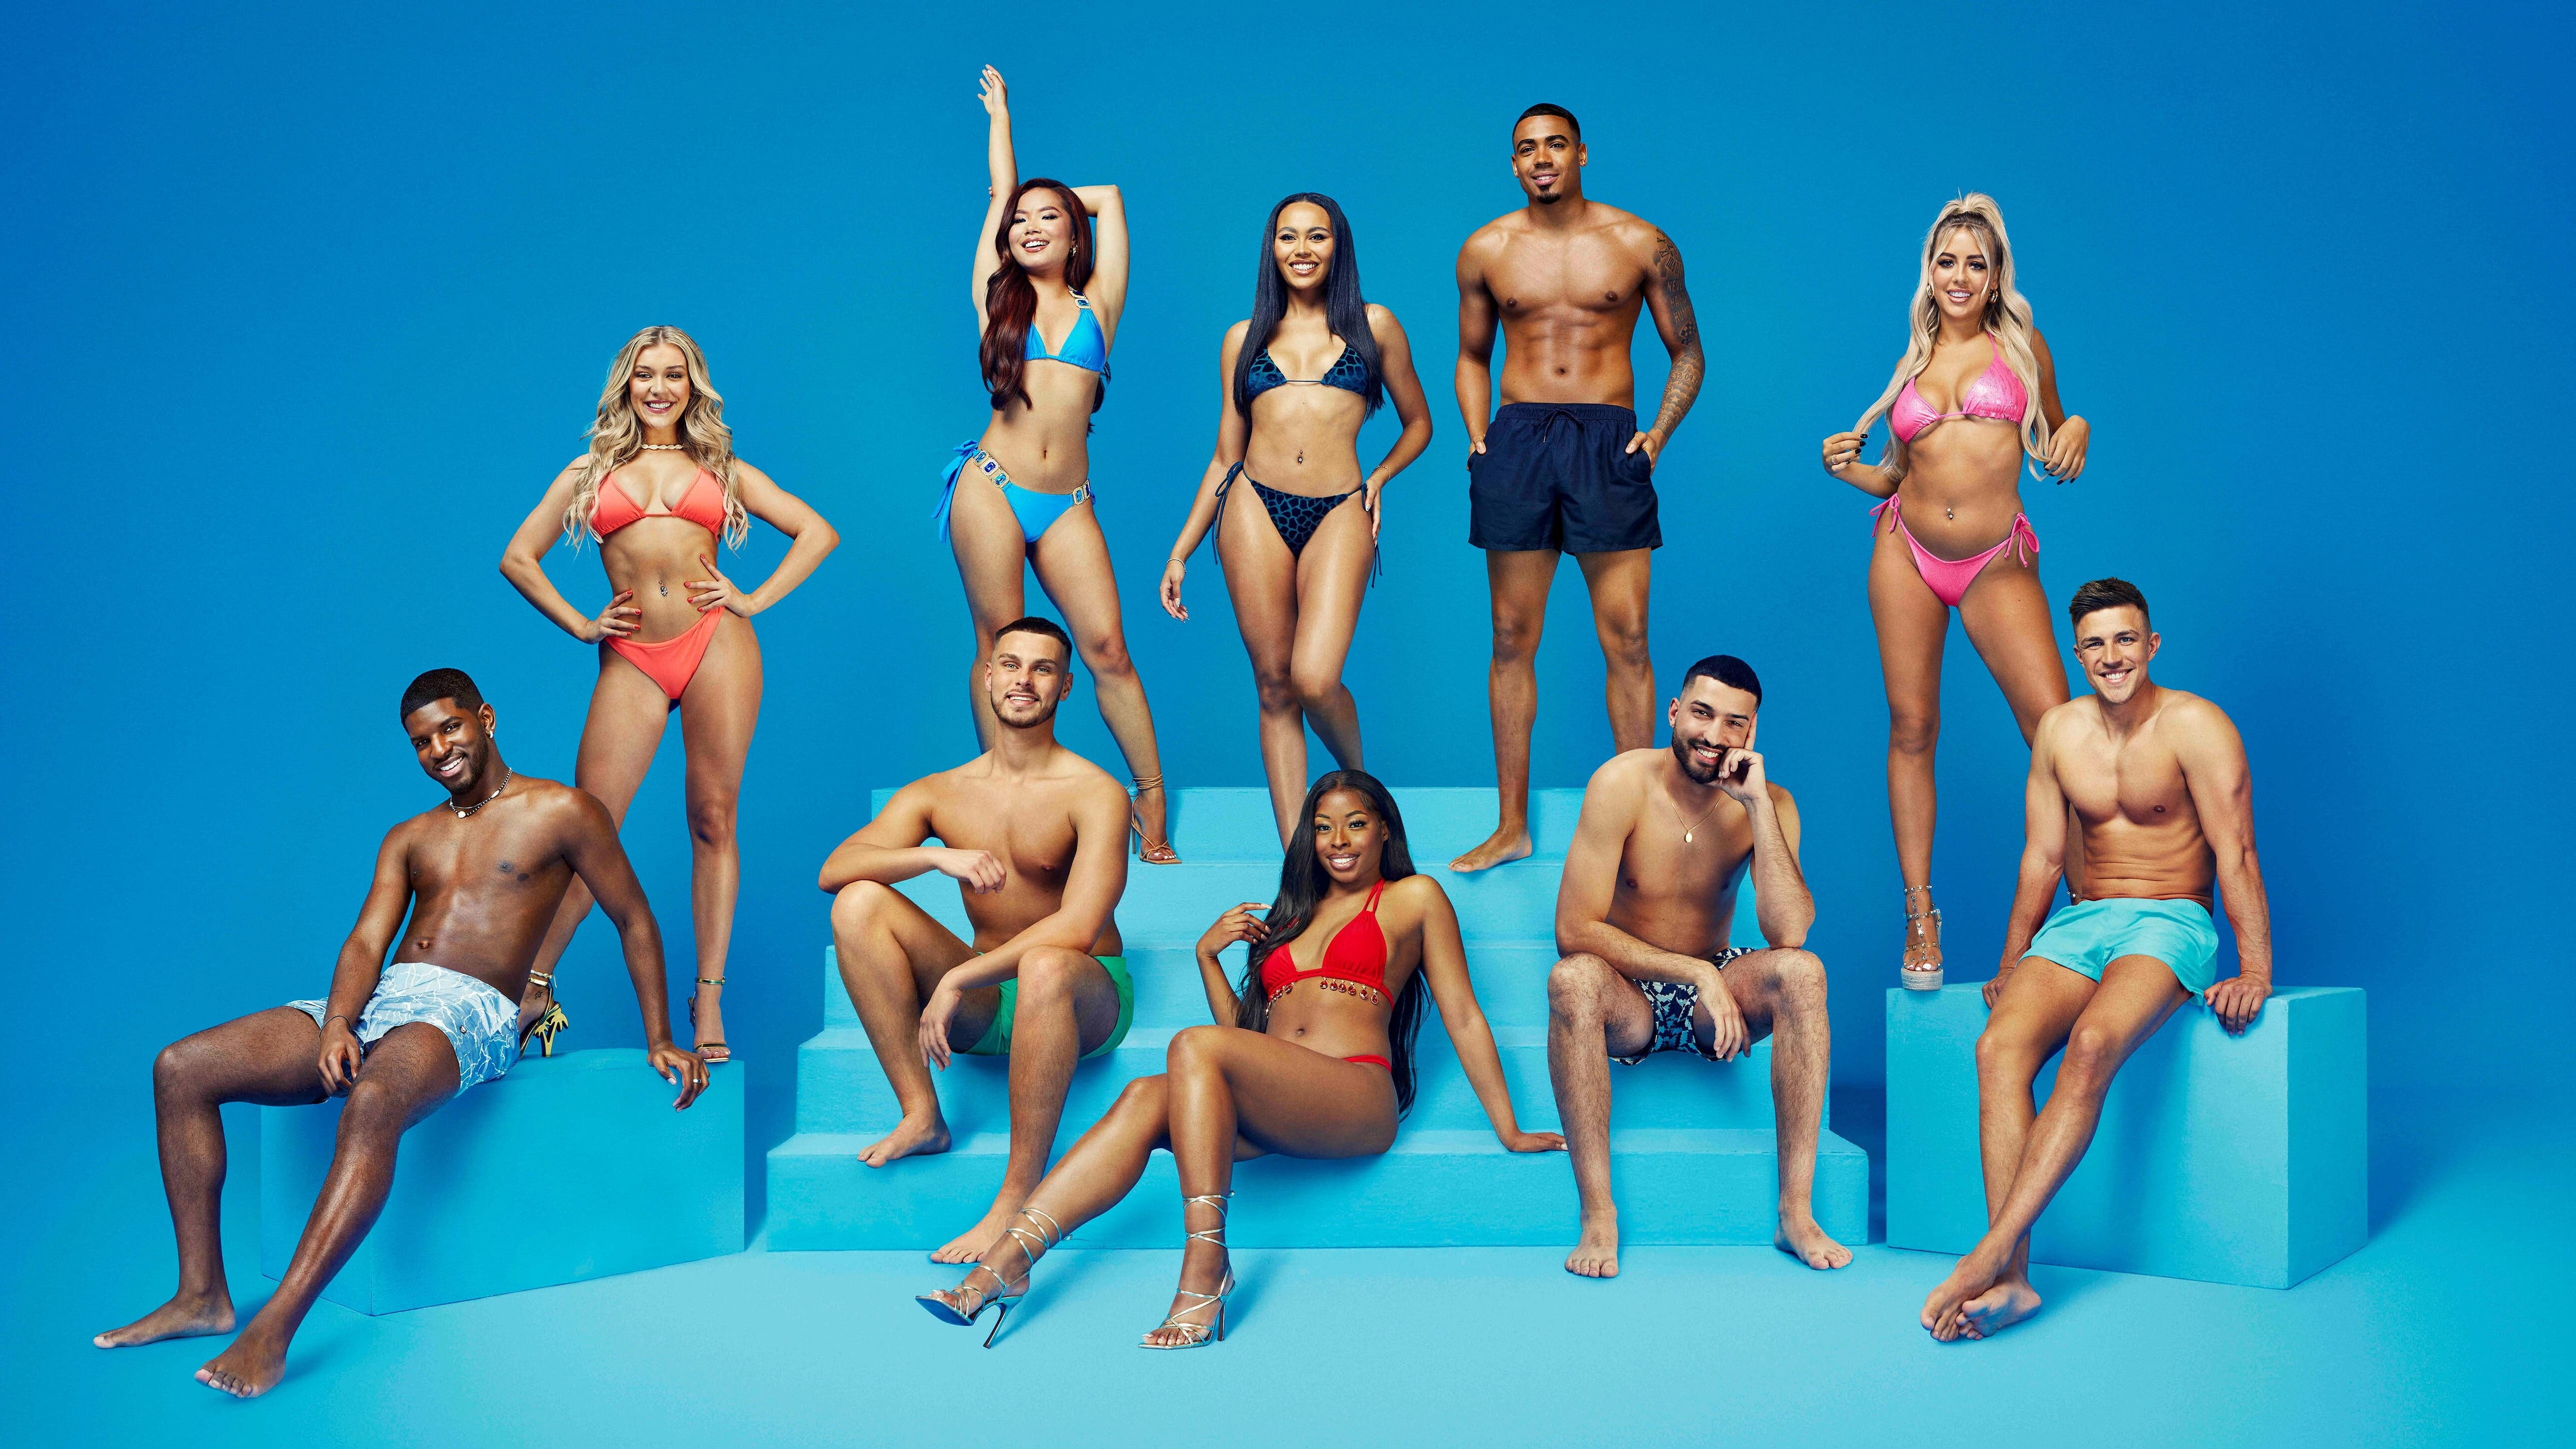 The new series of the ITV dating show will begin on Monday night with a fresh batch of 10 islanders.